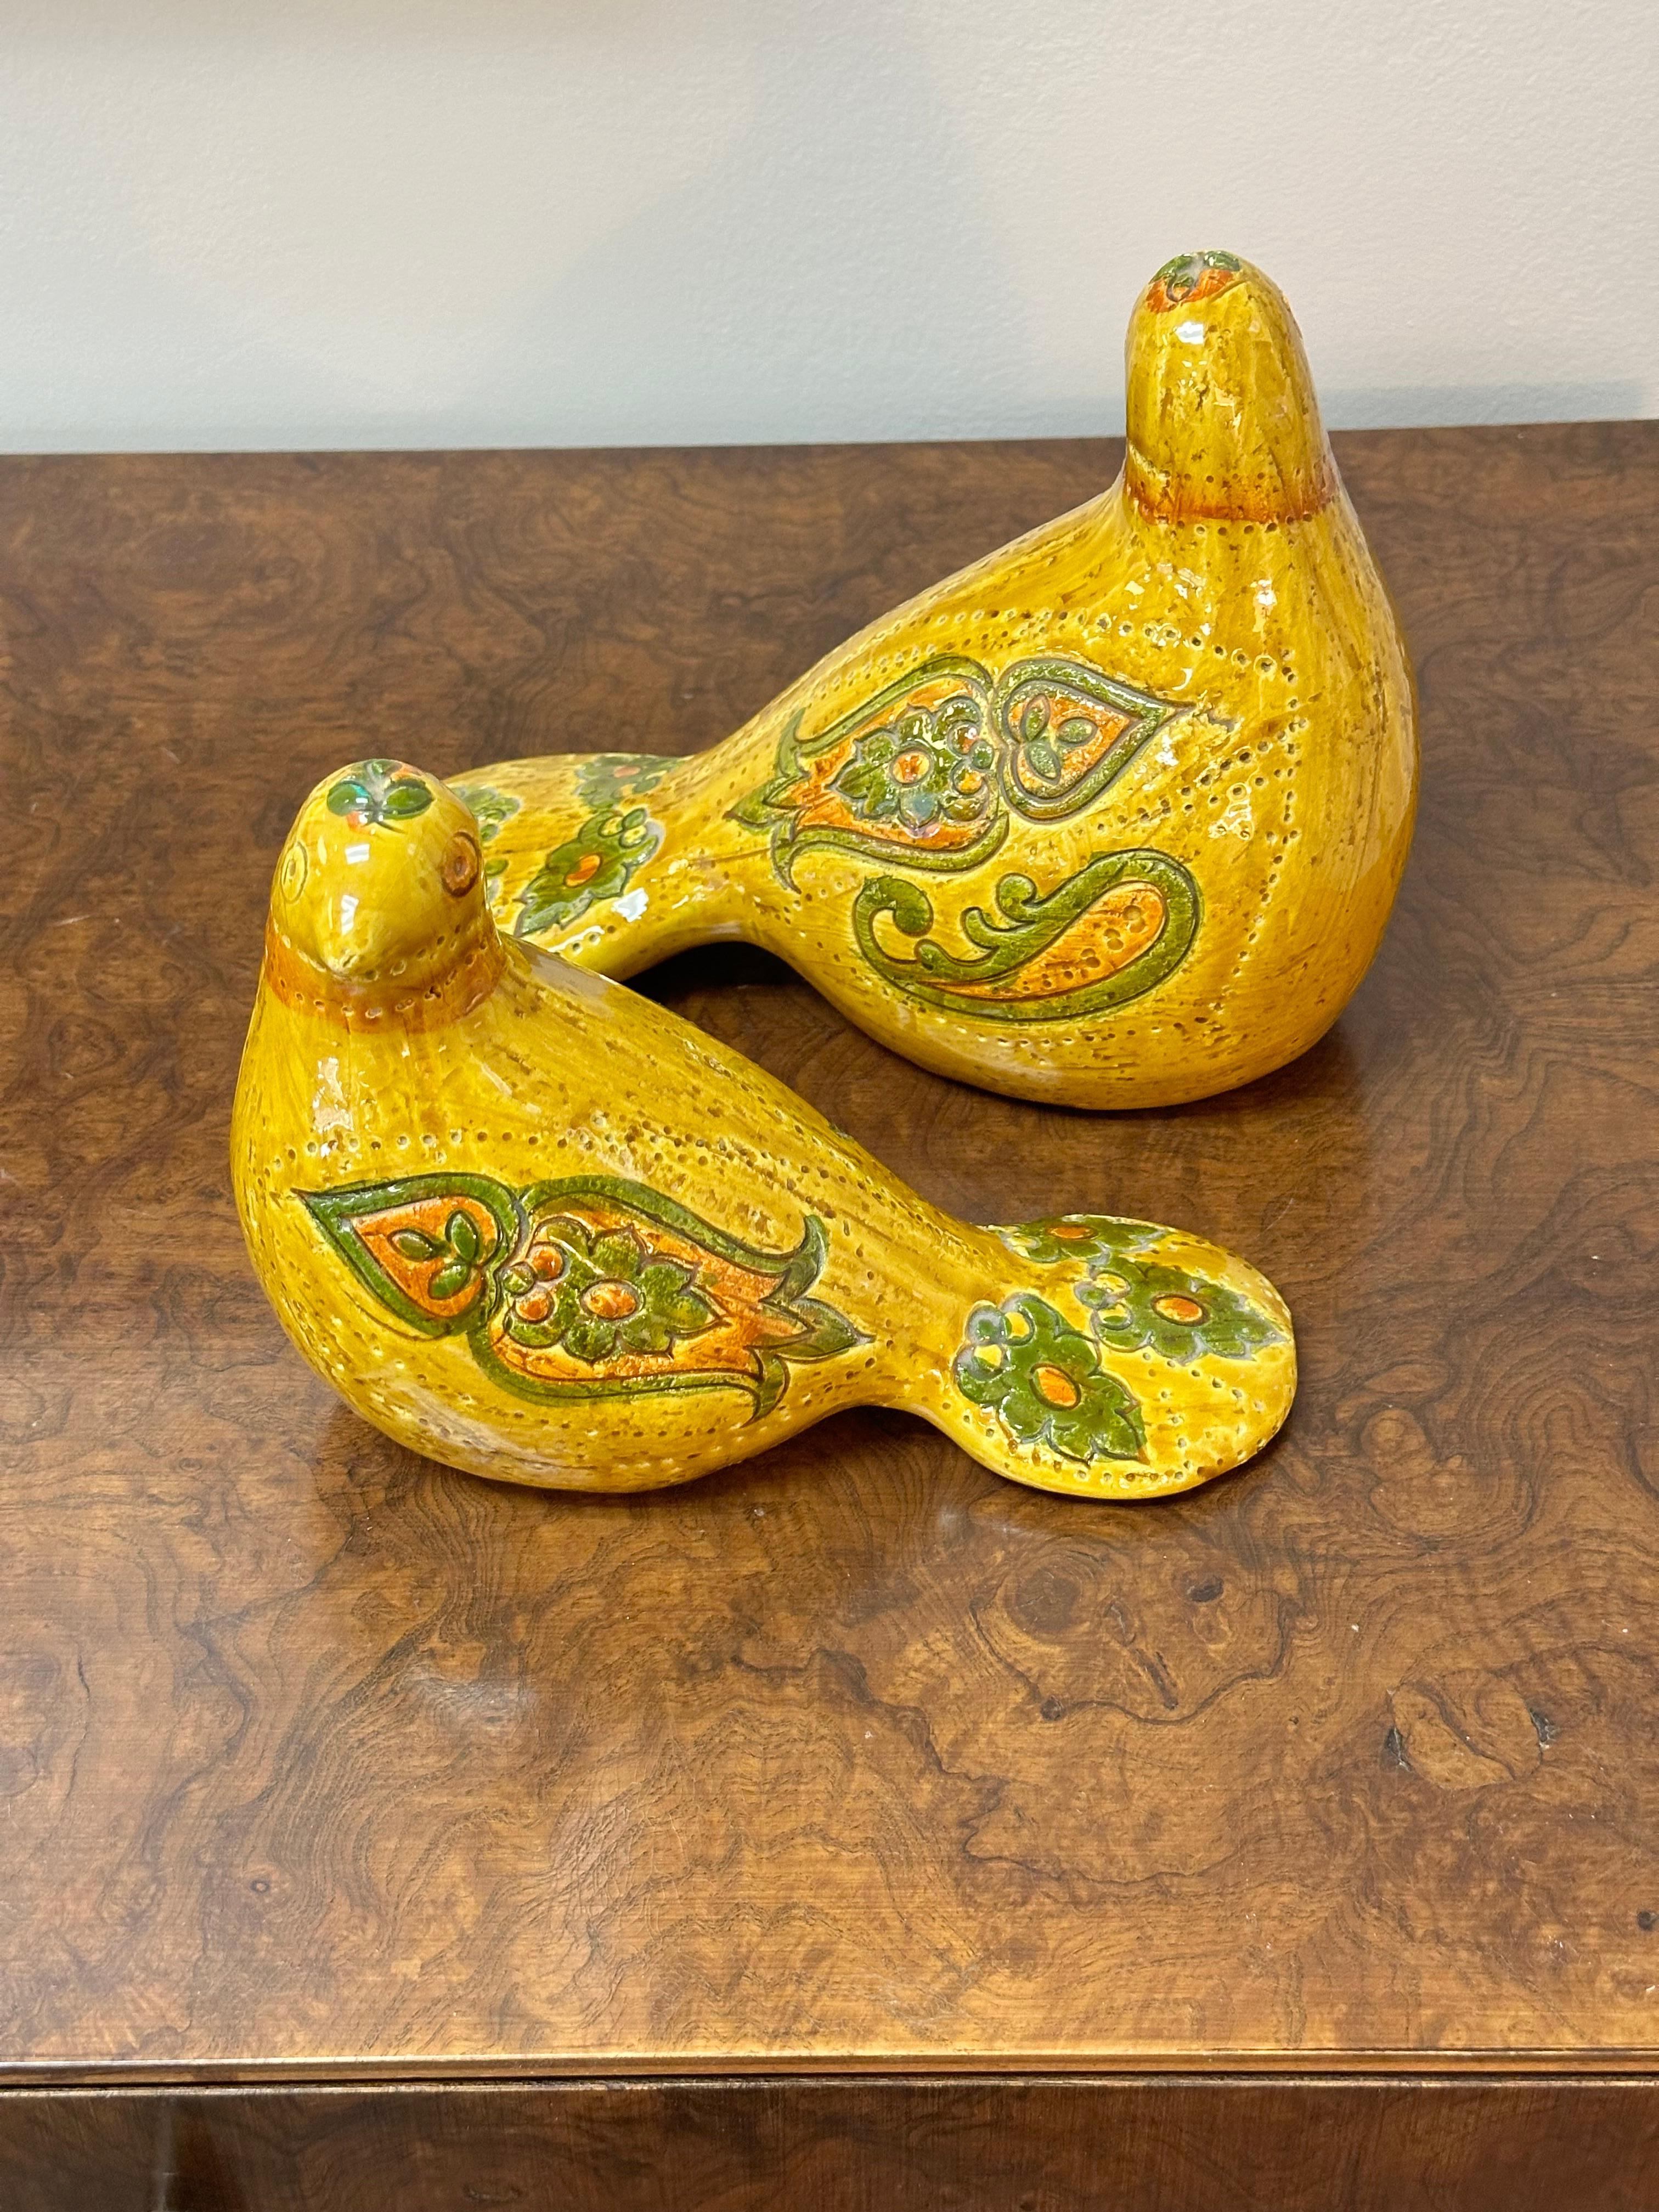 Aldo Londi for Bitossi Pottery Doves, a pair (imported by Rosenthal Netter)

A beautiful vintage pair of mustard yellow stoneware doves designed by Italian ceramist Aldo Londi (1911-2003) for Bitossi. Made in Italy and imported to the US by